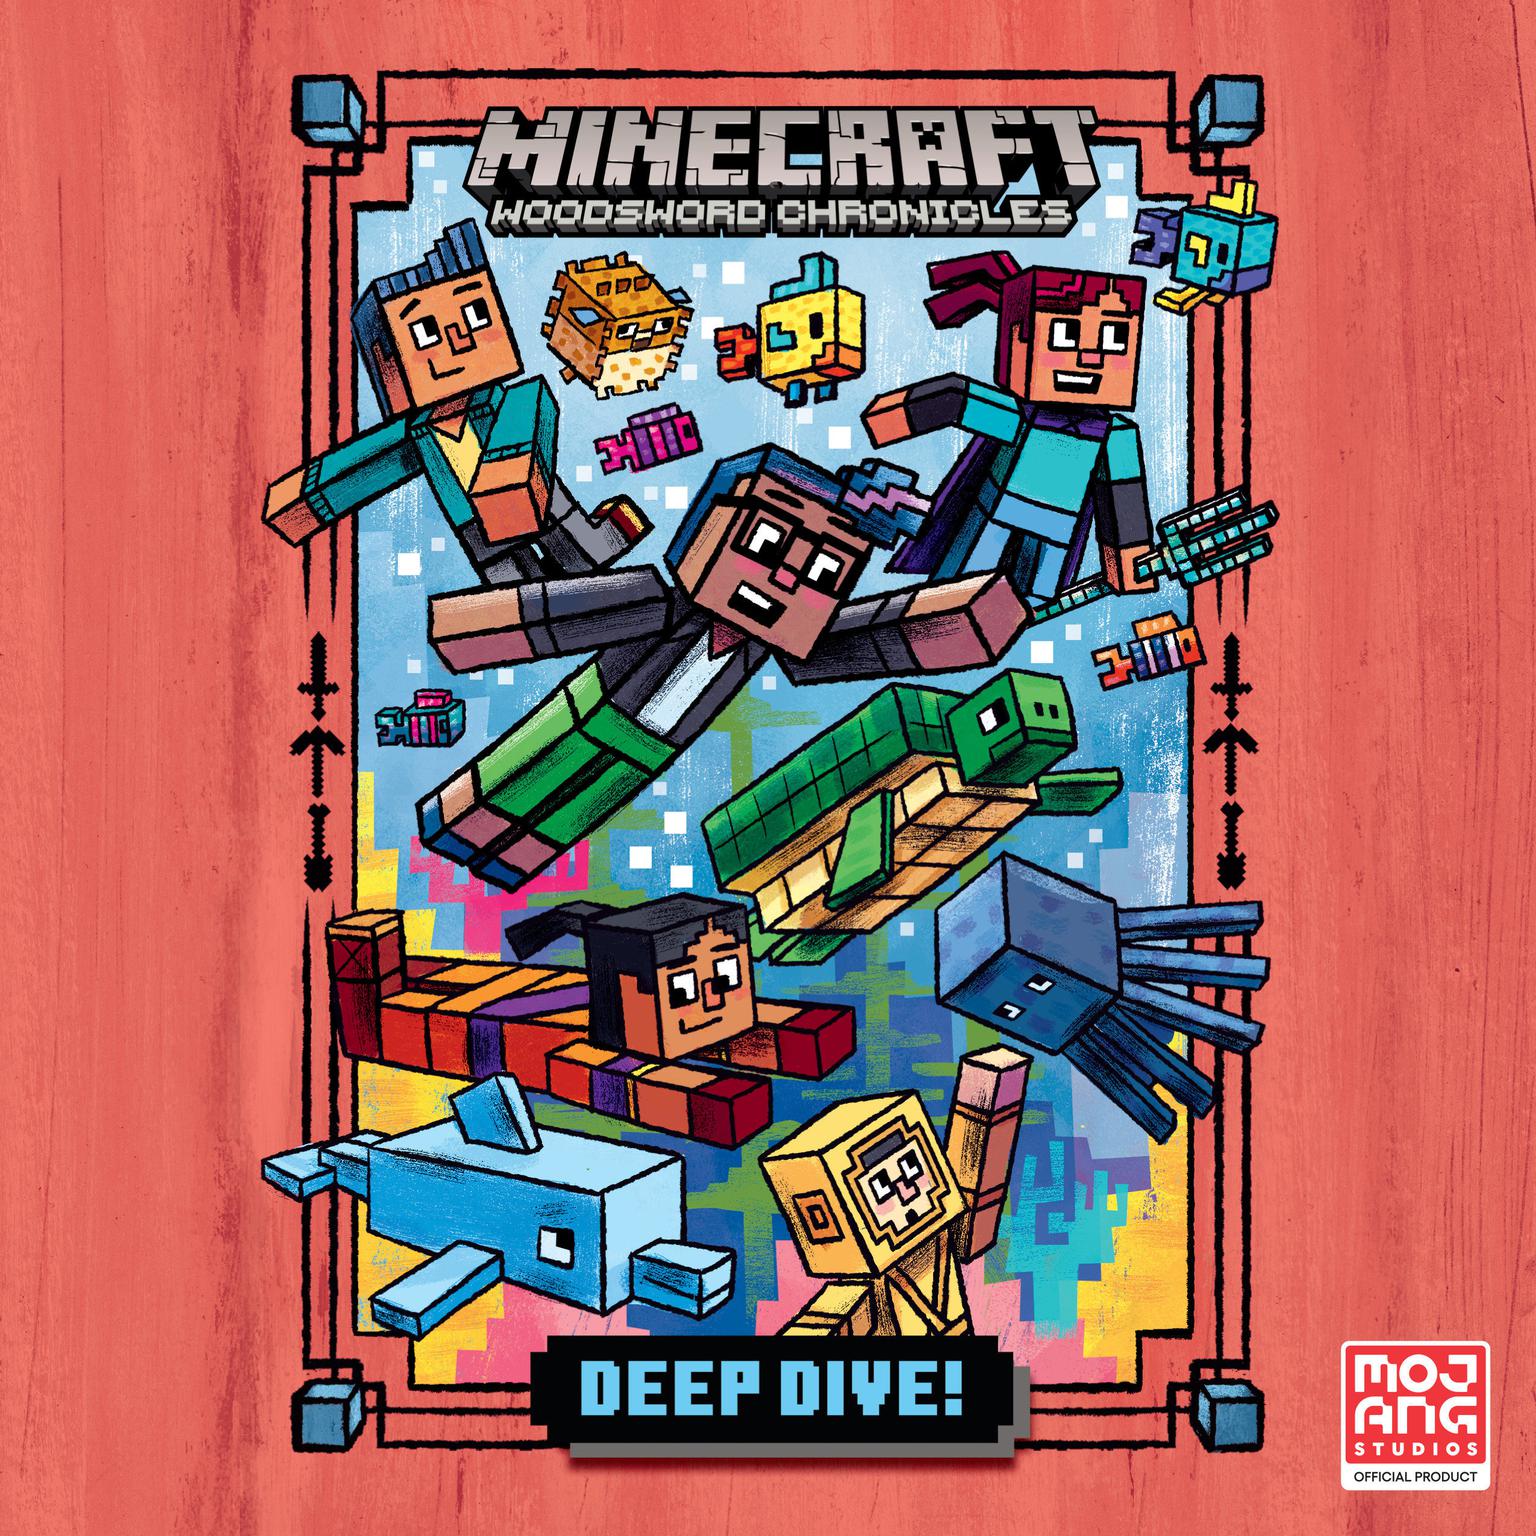 Deep Dive! (Minecraft Woodsword Chronicles #3) Audiobook, by Nick Eliopulos